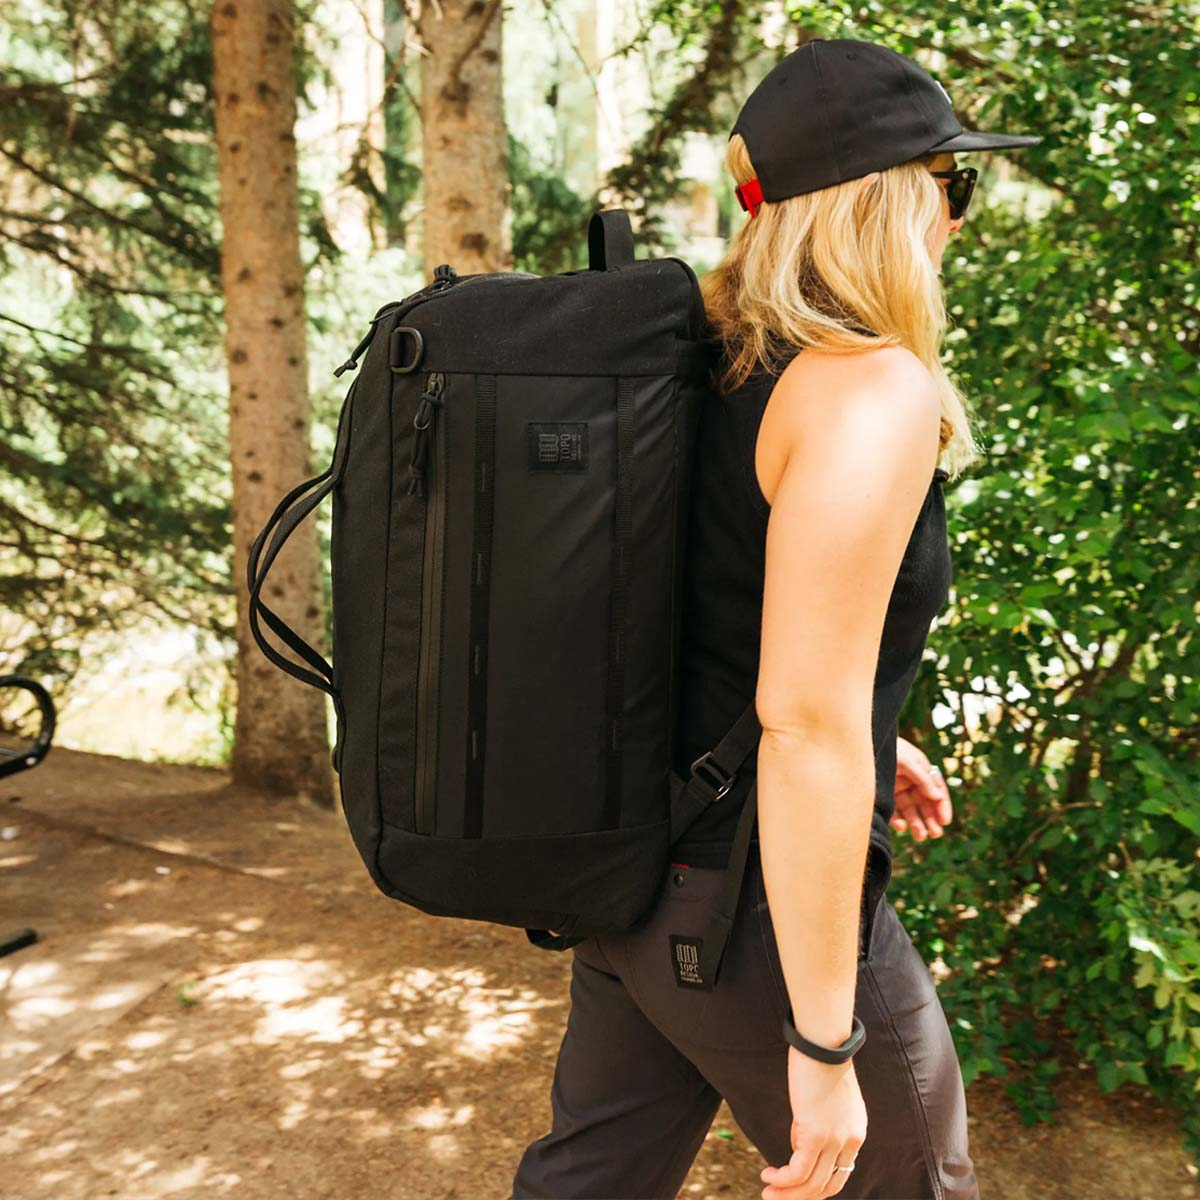 Topo Designs Mountain Duffel 40 Liters Black, is perfect for weekend trips